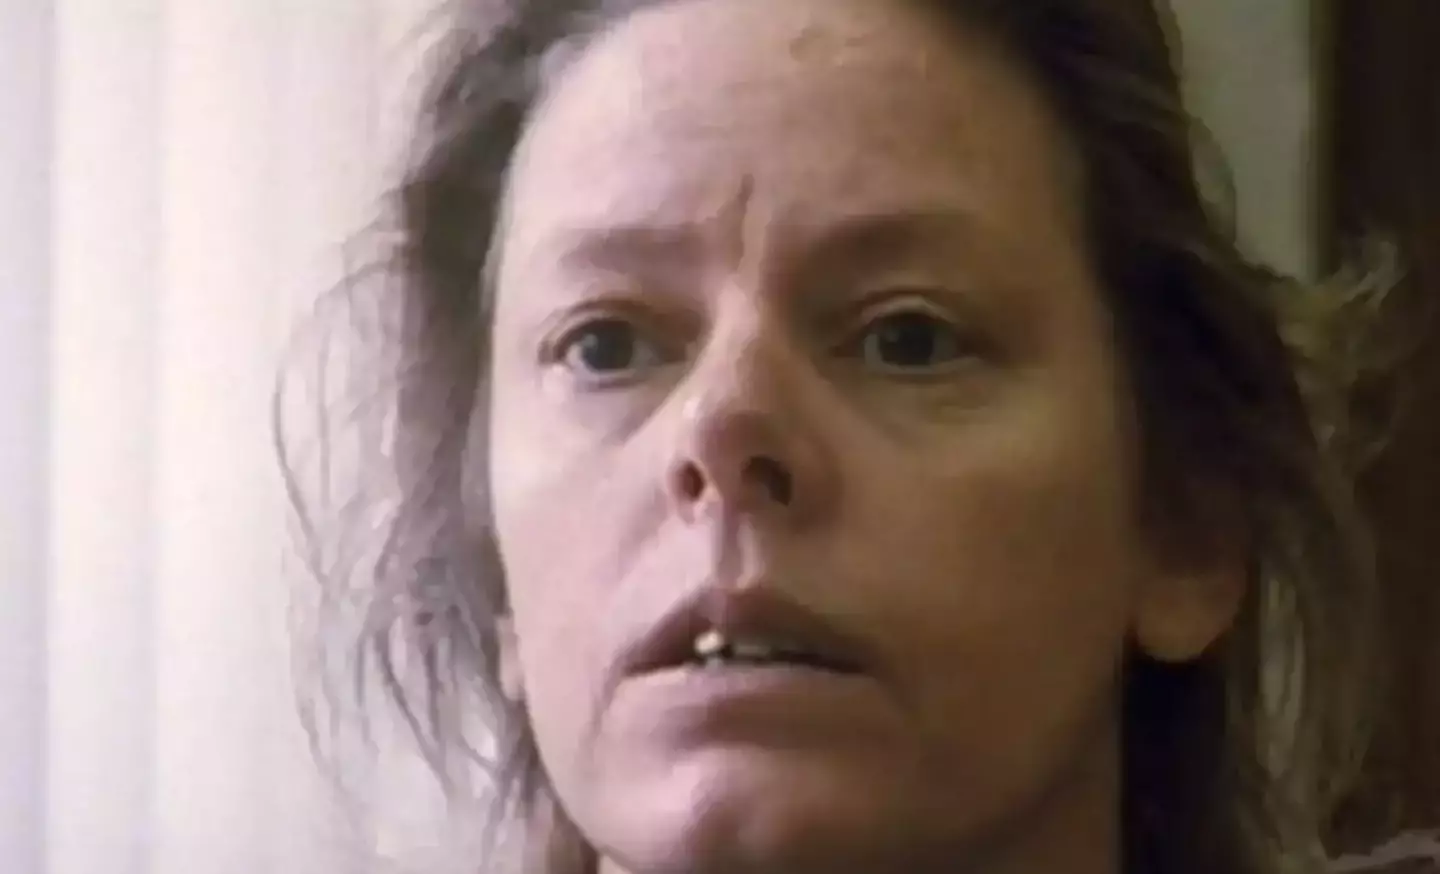 Serial killer Aileen Wuornos spent more than a decade on death row.